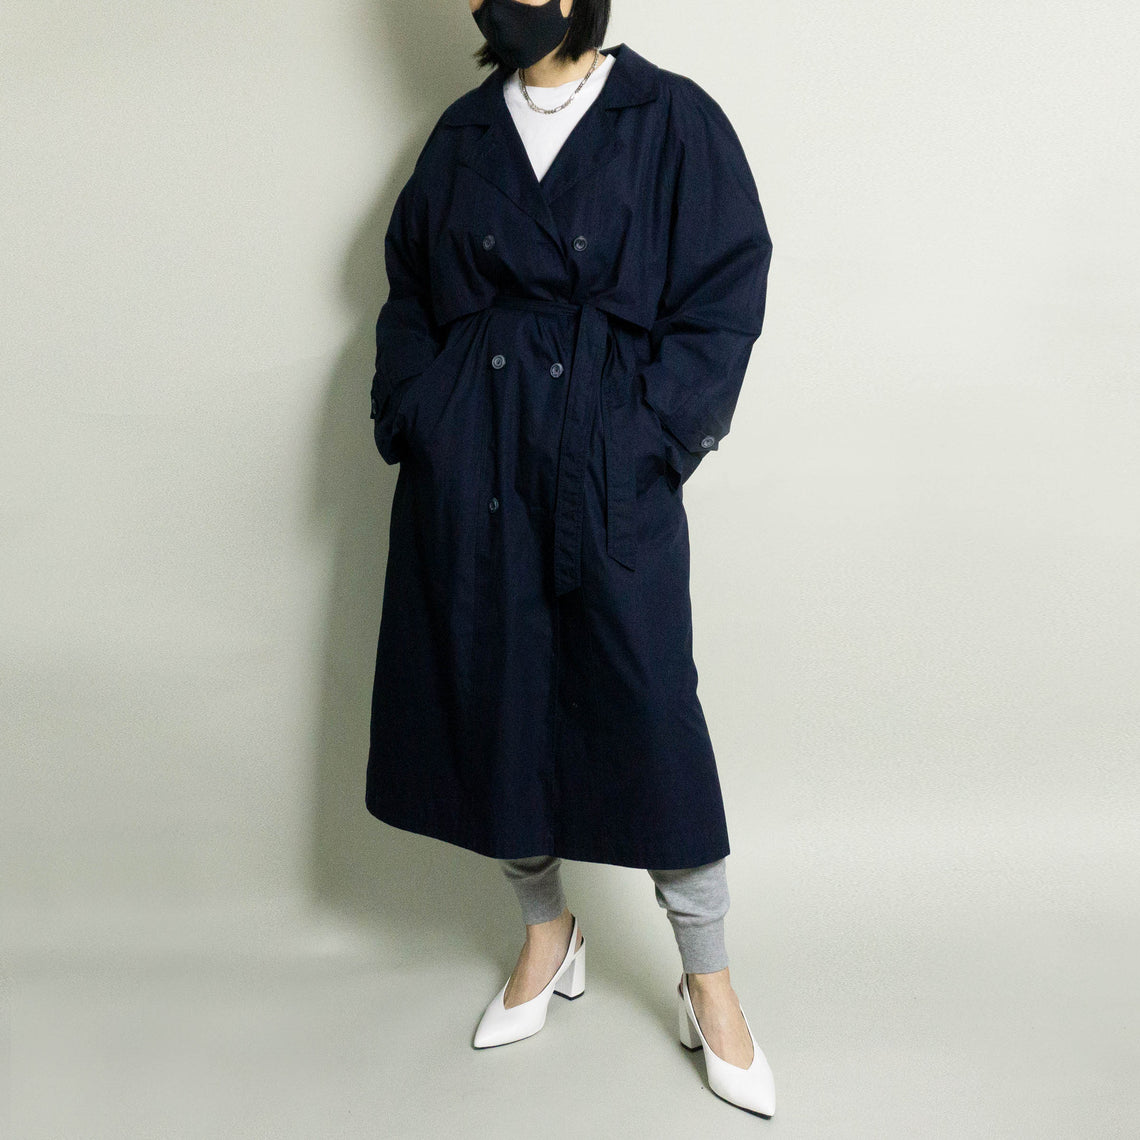 VINTAGE INSULATED TRENCH COAT | NAVY | S/M/L